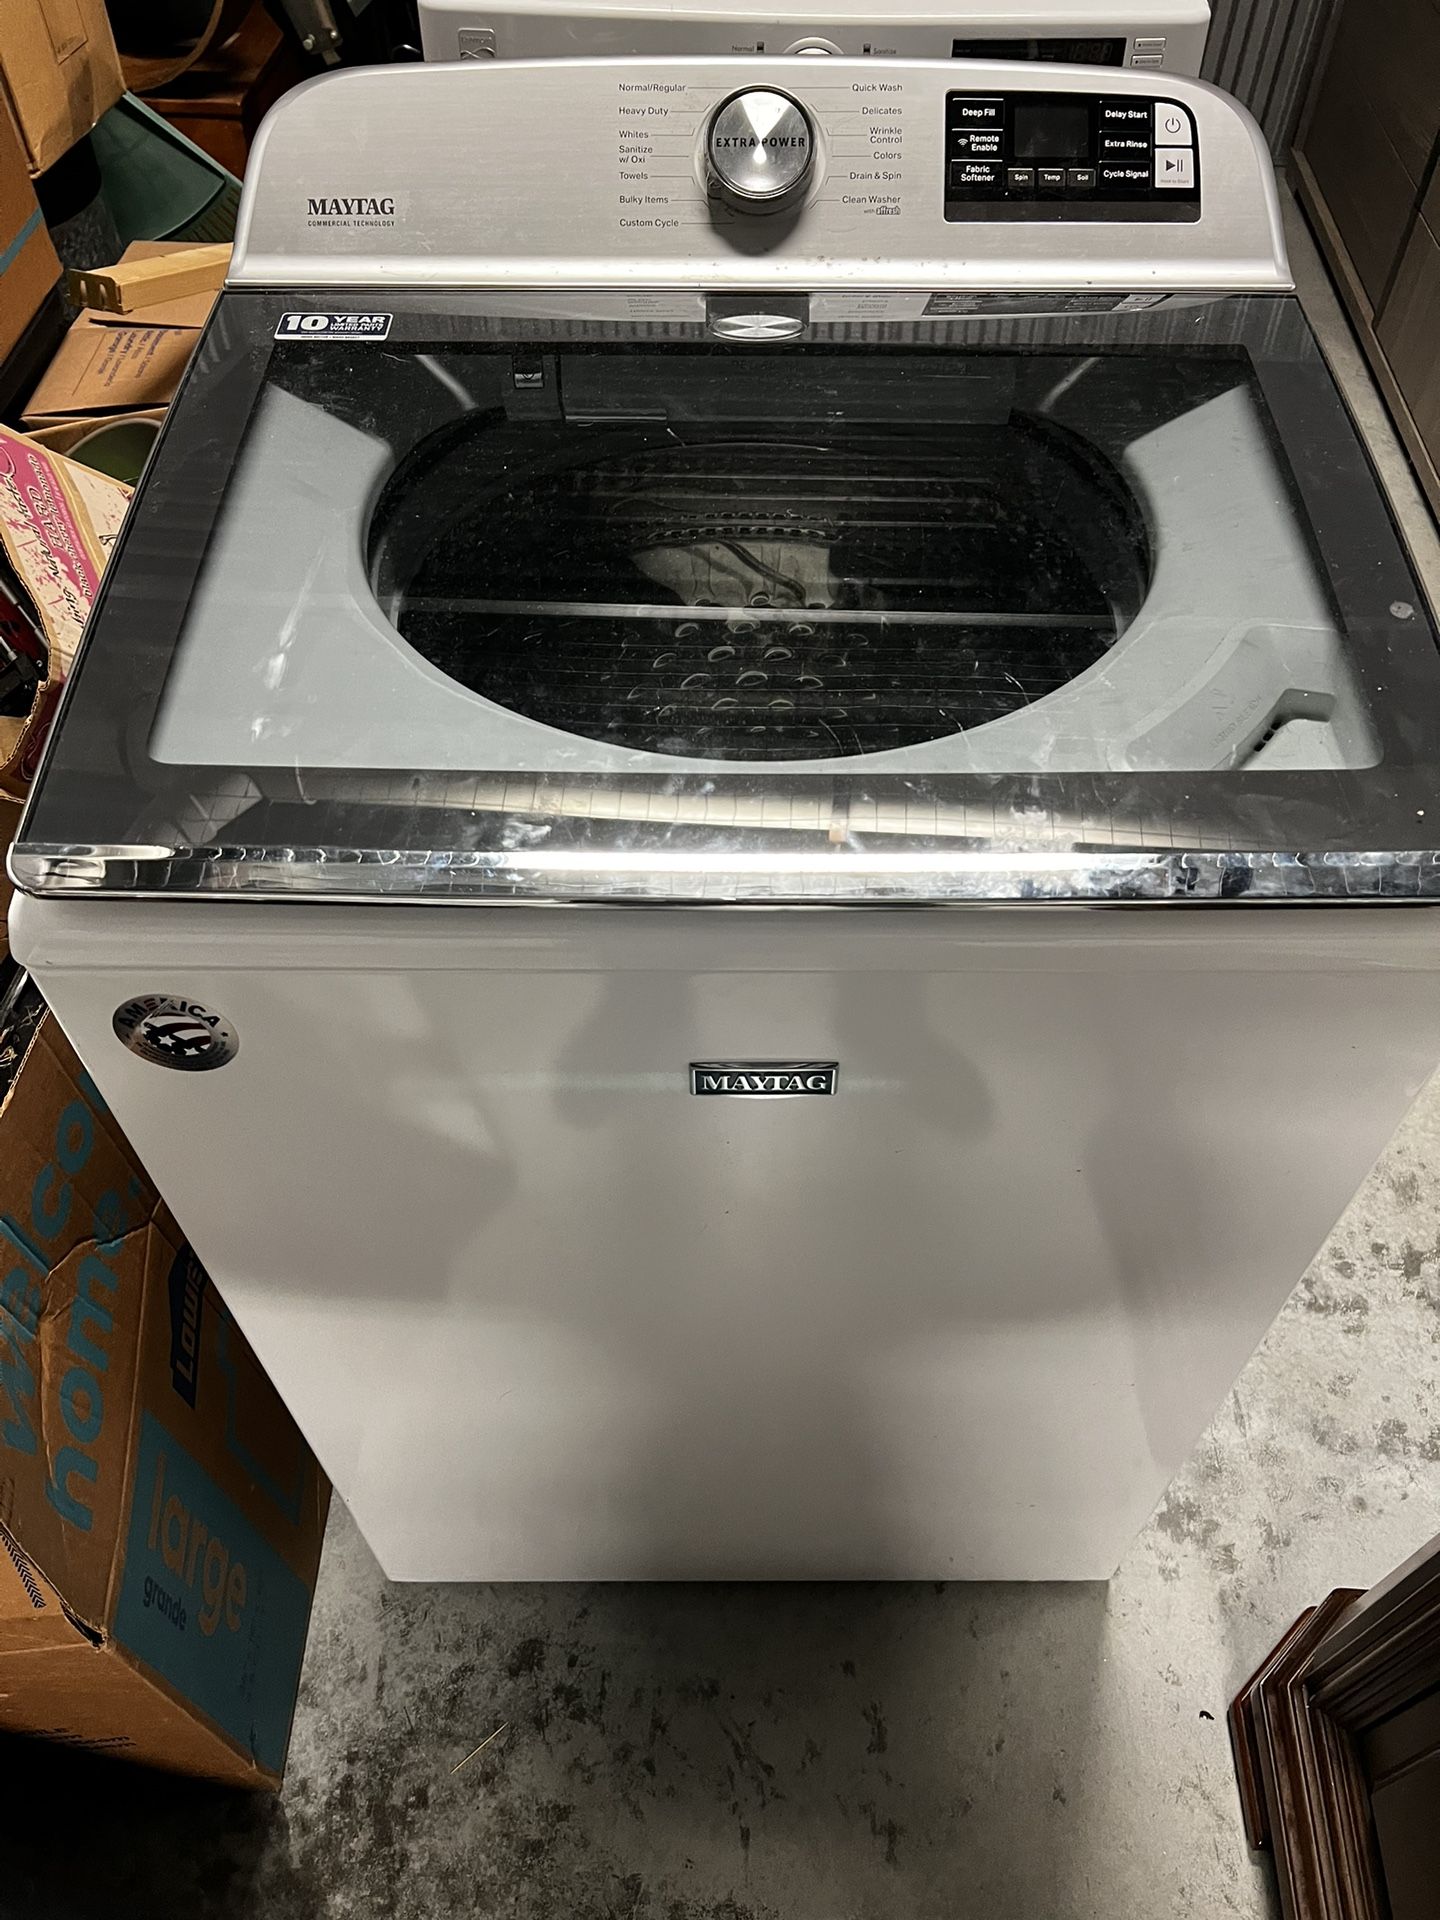 ***MUST SELL: WASHER (MAYTAG) AND DRYER (KENMORE)